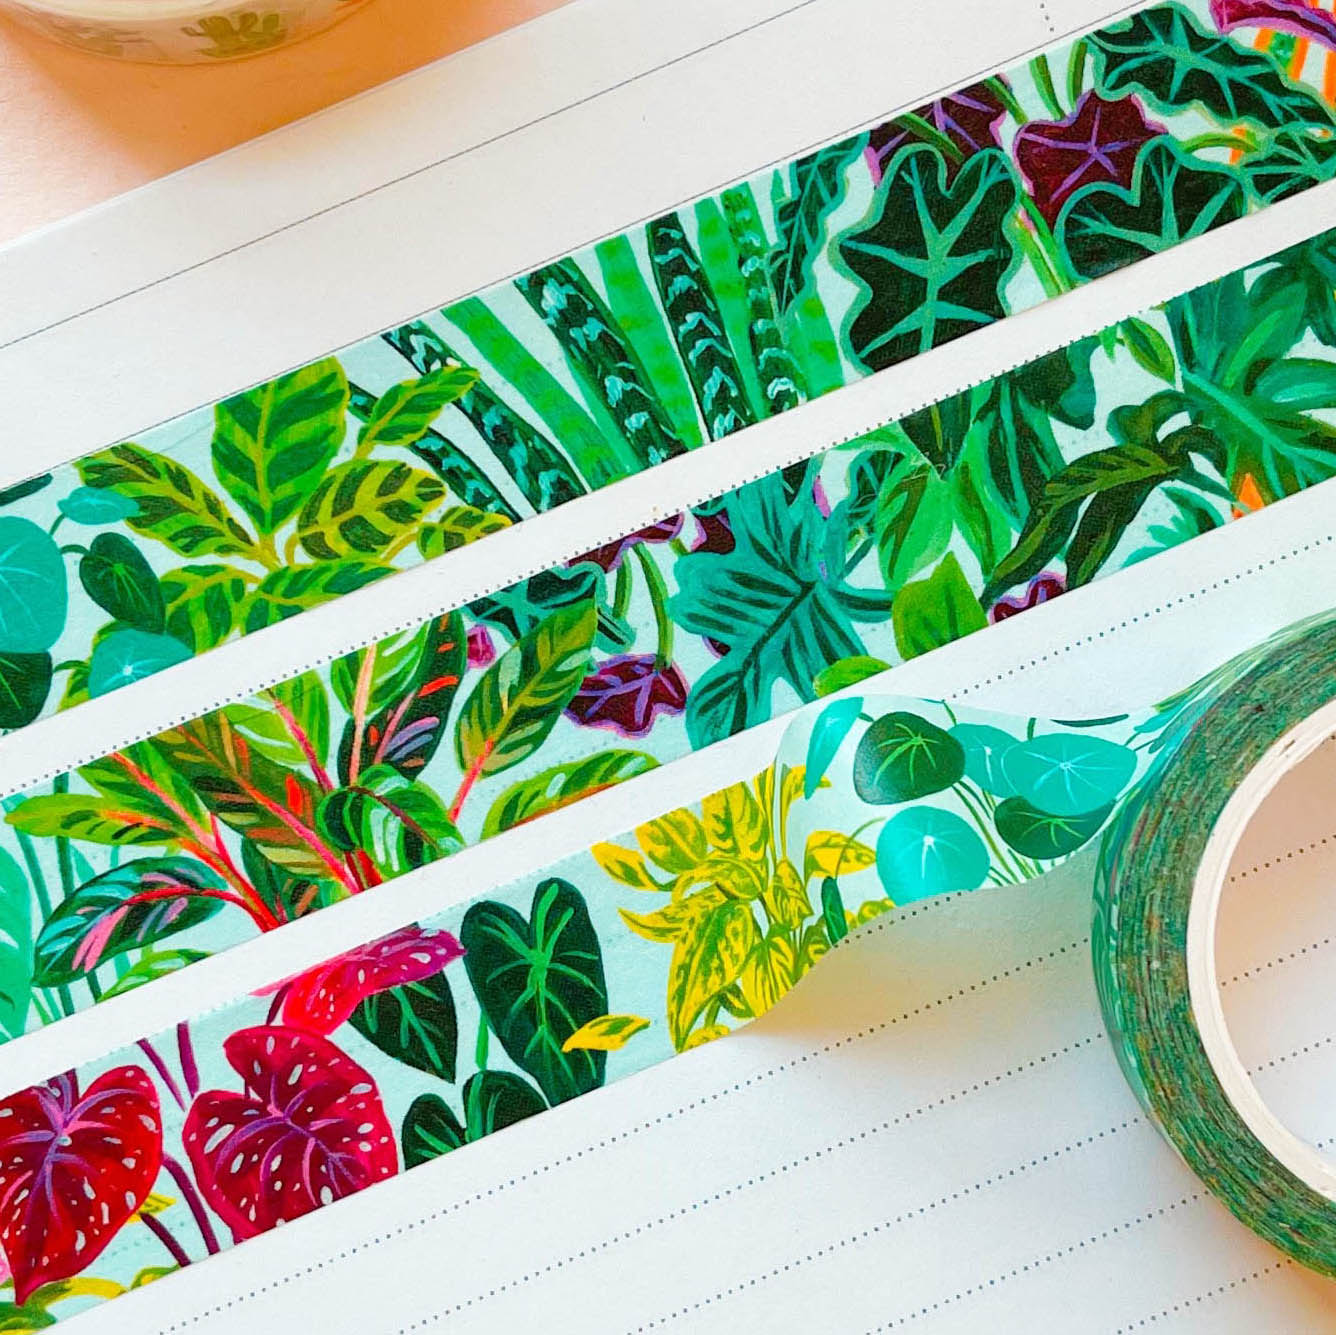 Plant Washi Tape pattern detail shot. Colorful plant pattern showing many plant varieties.